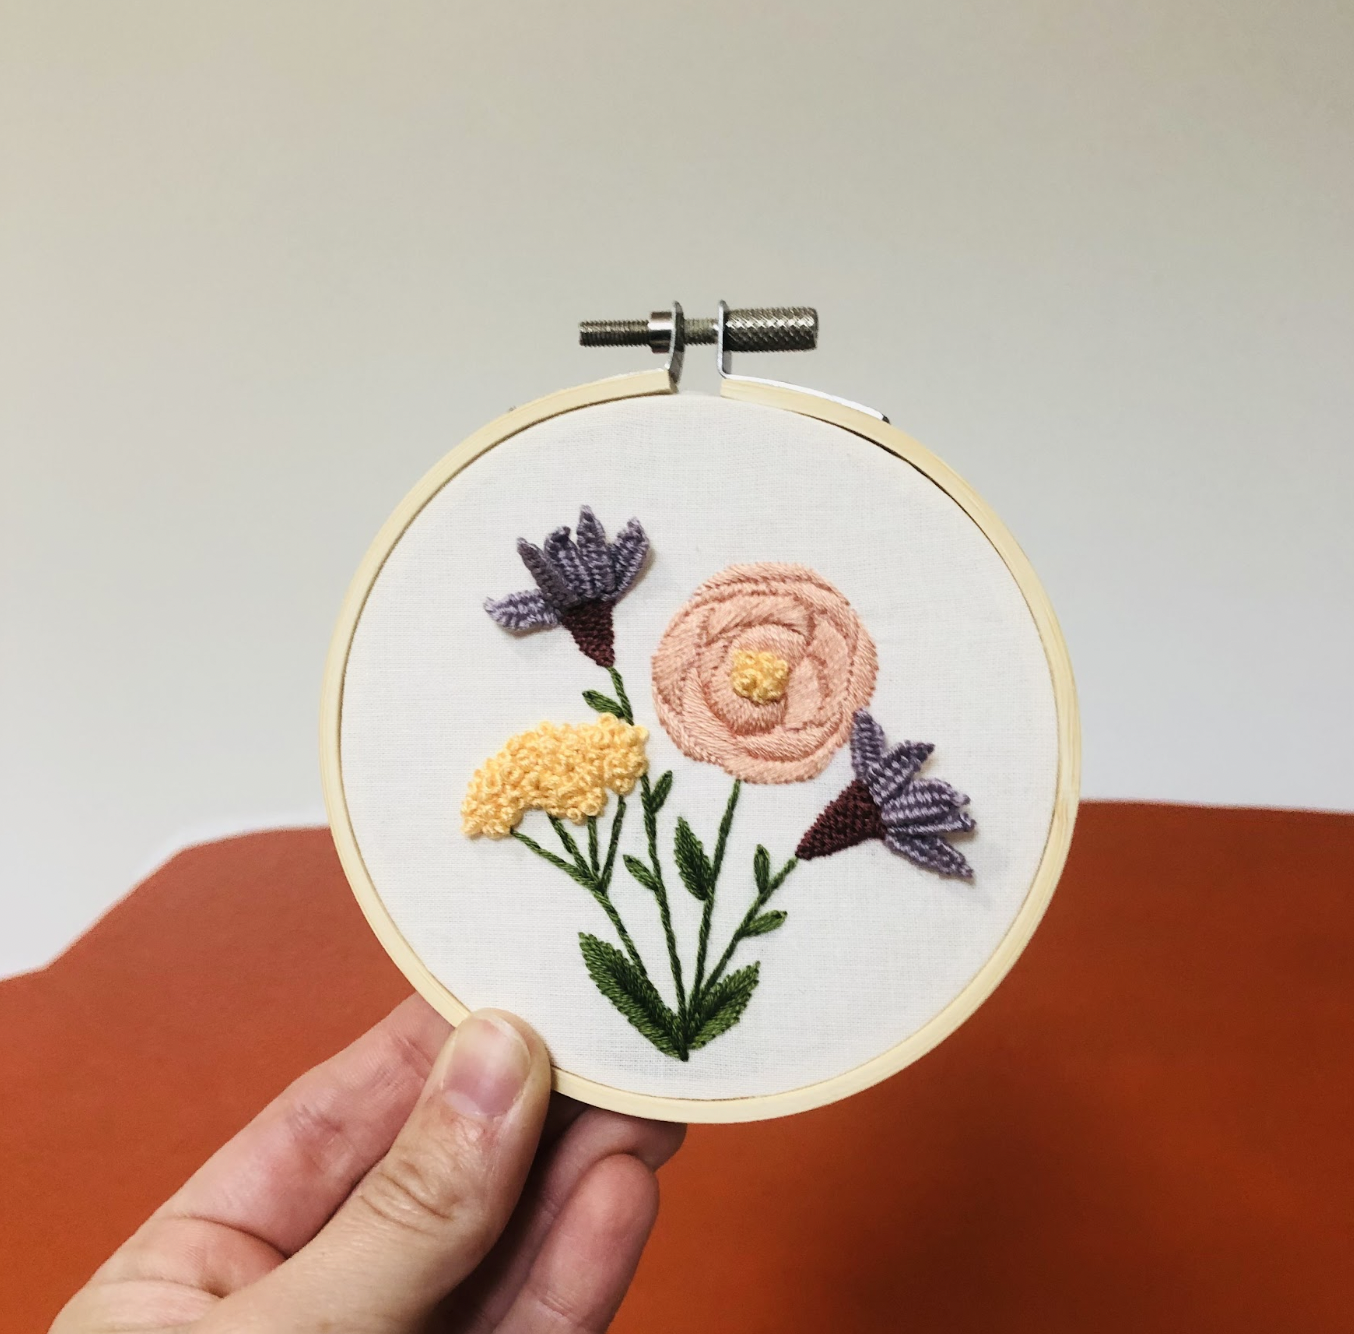 EMBROIDERY CLASS: Blooming Wildflowers